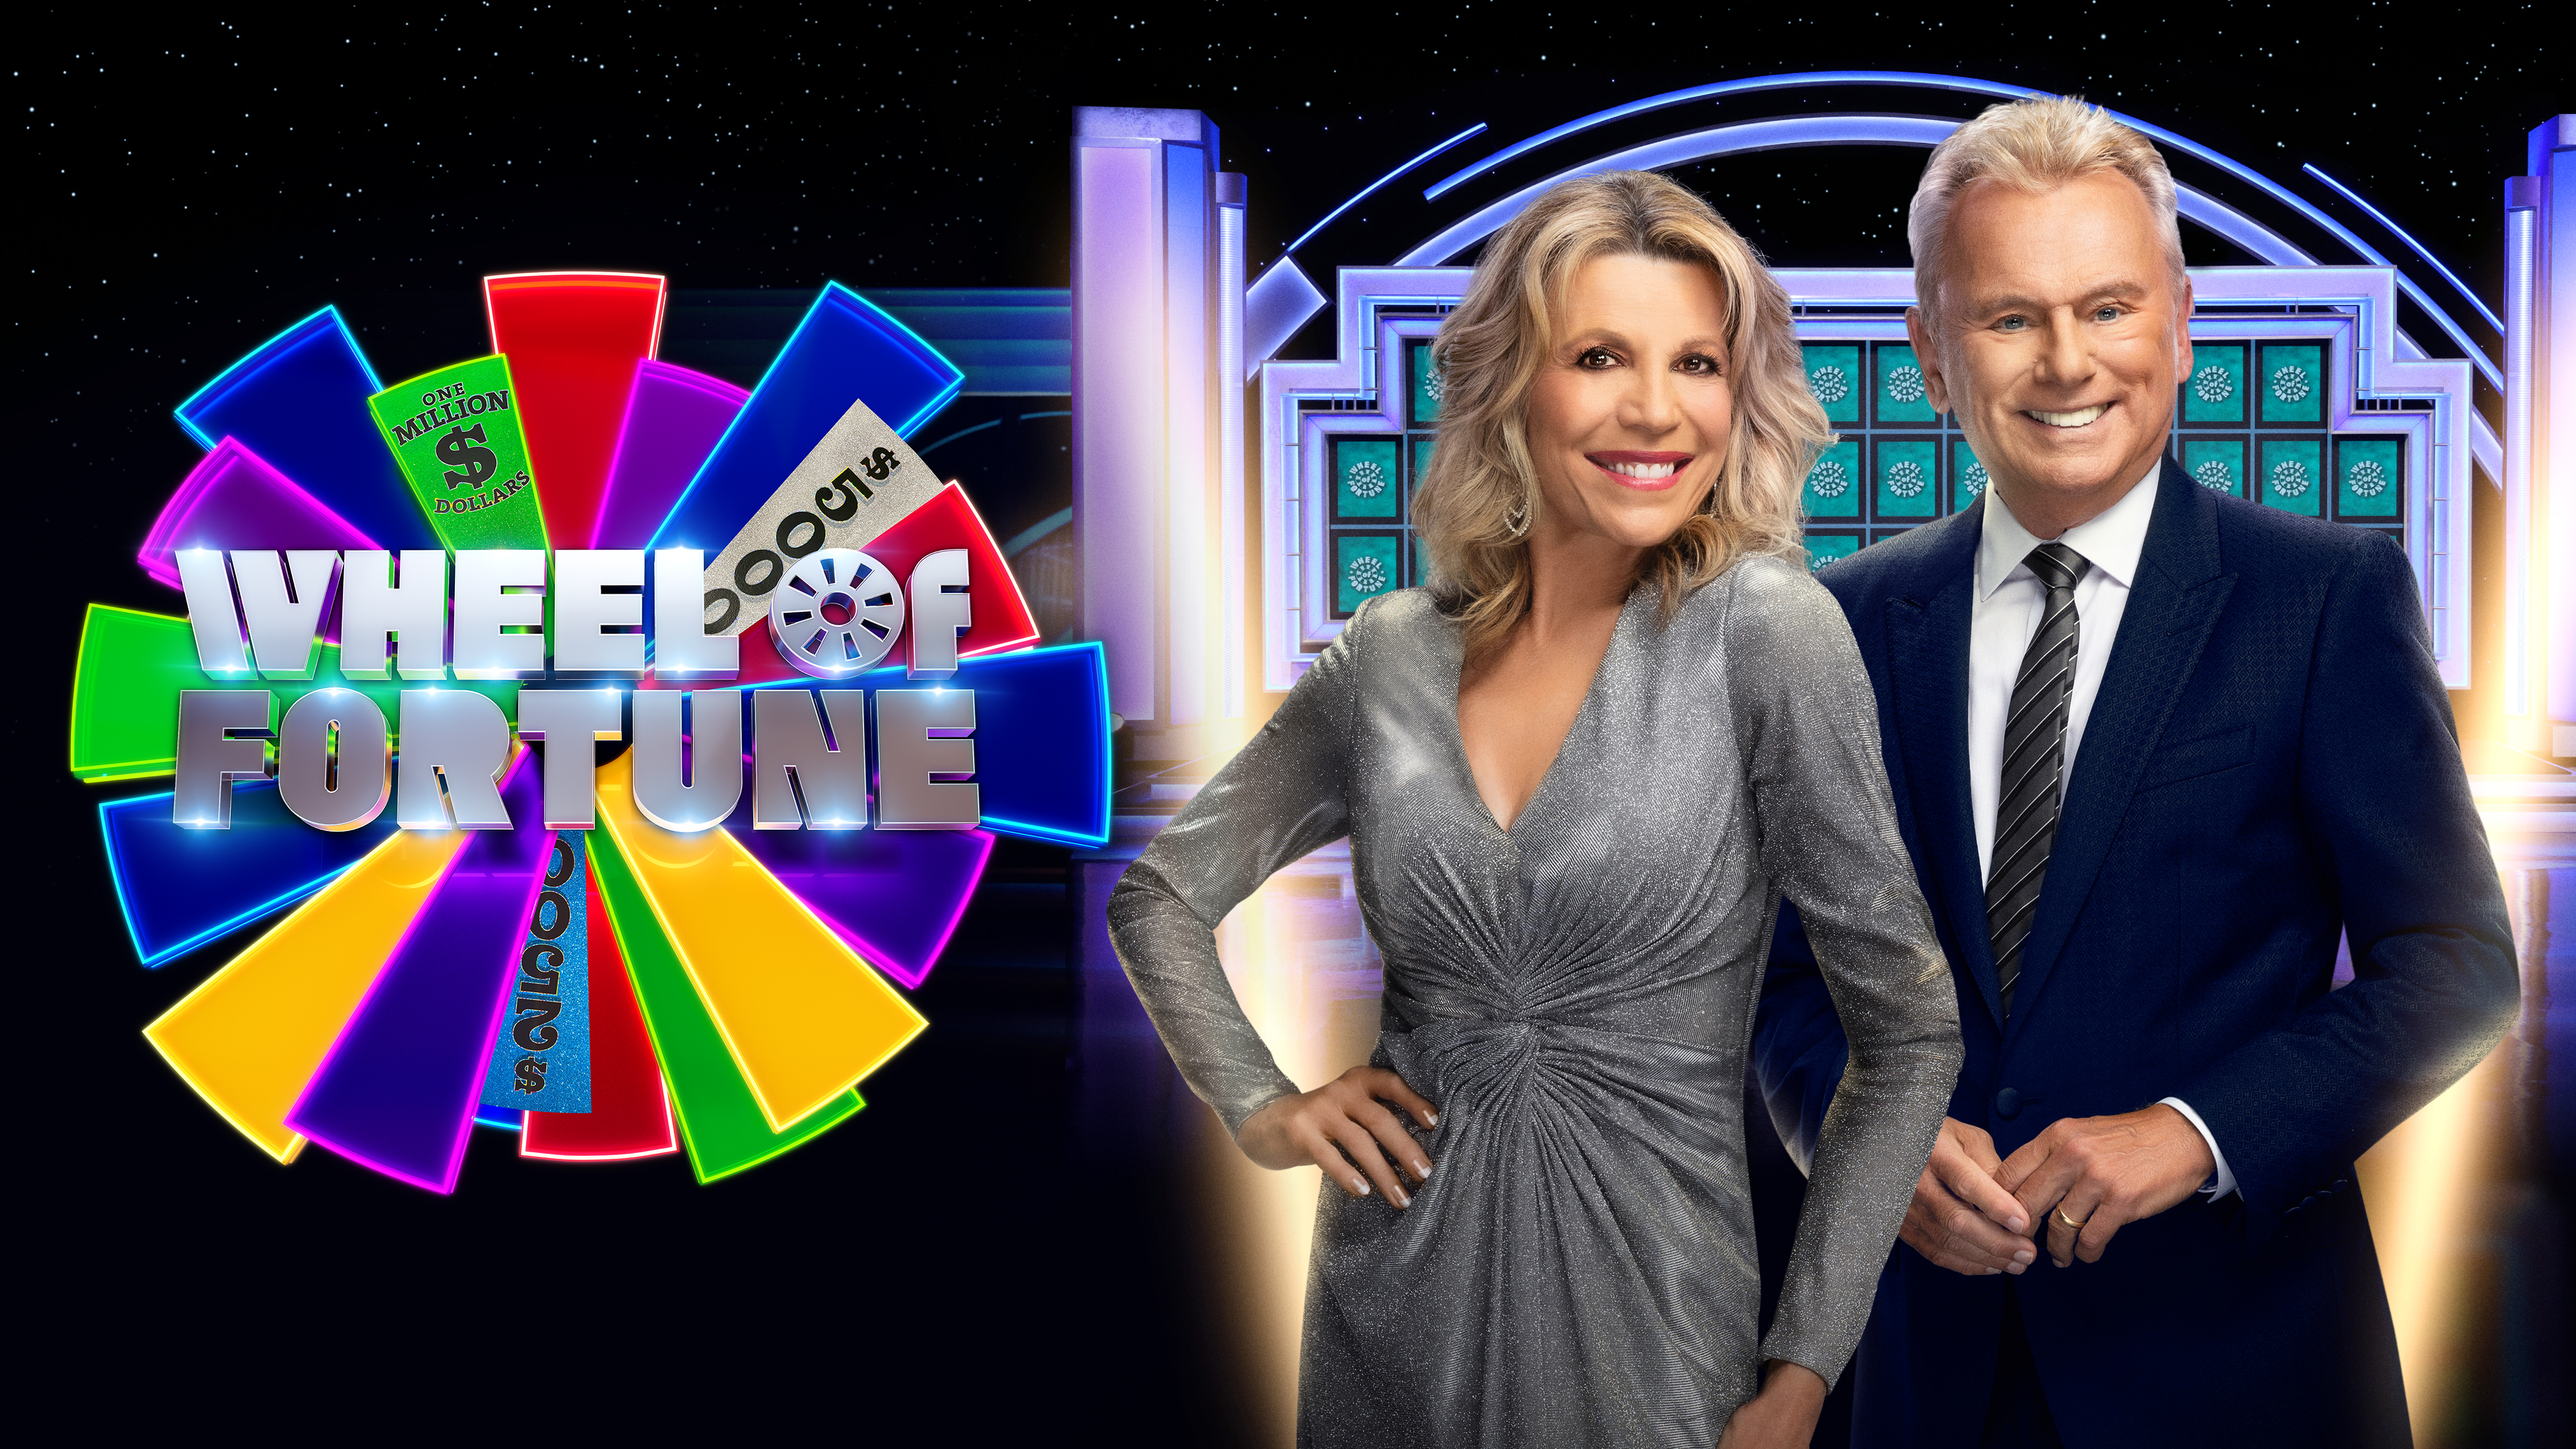 Wheel of Fortune - Syndicated Game Show - Where To Watch